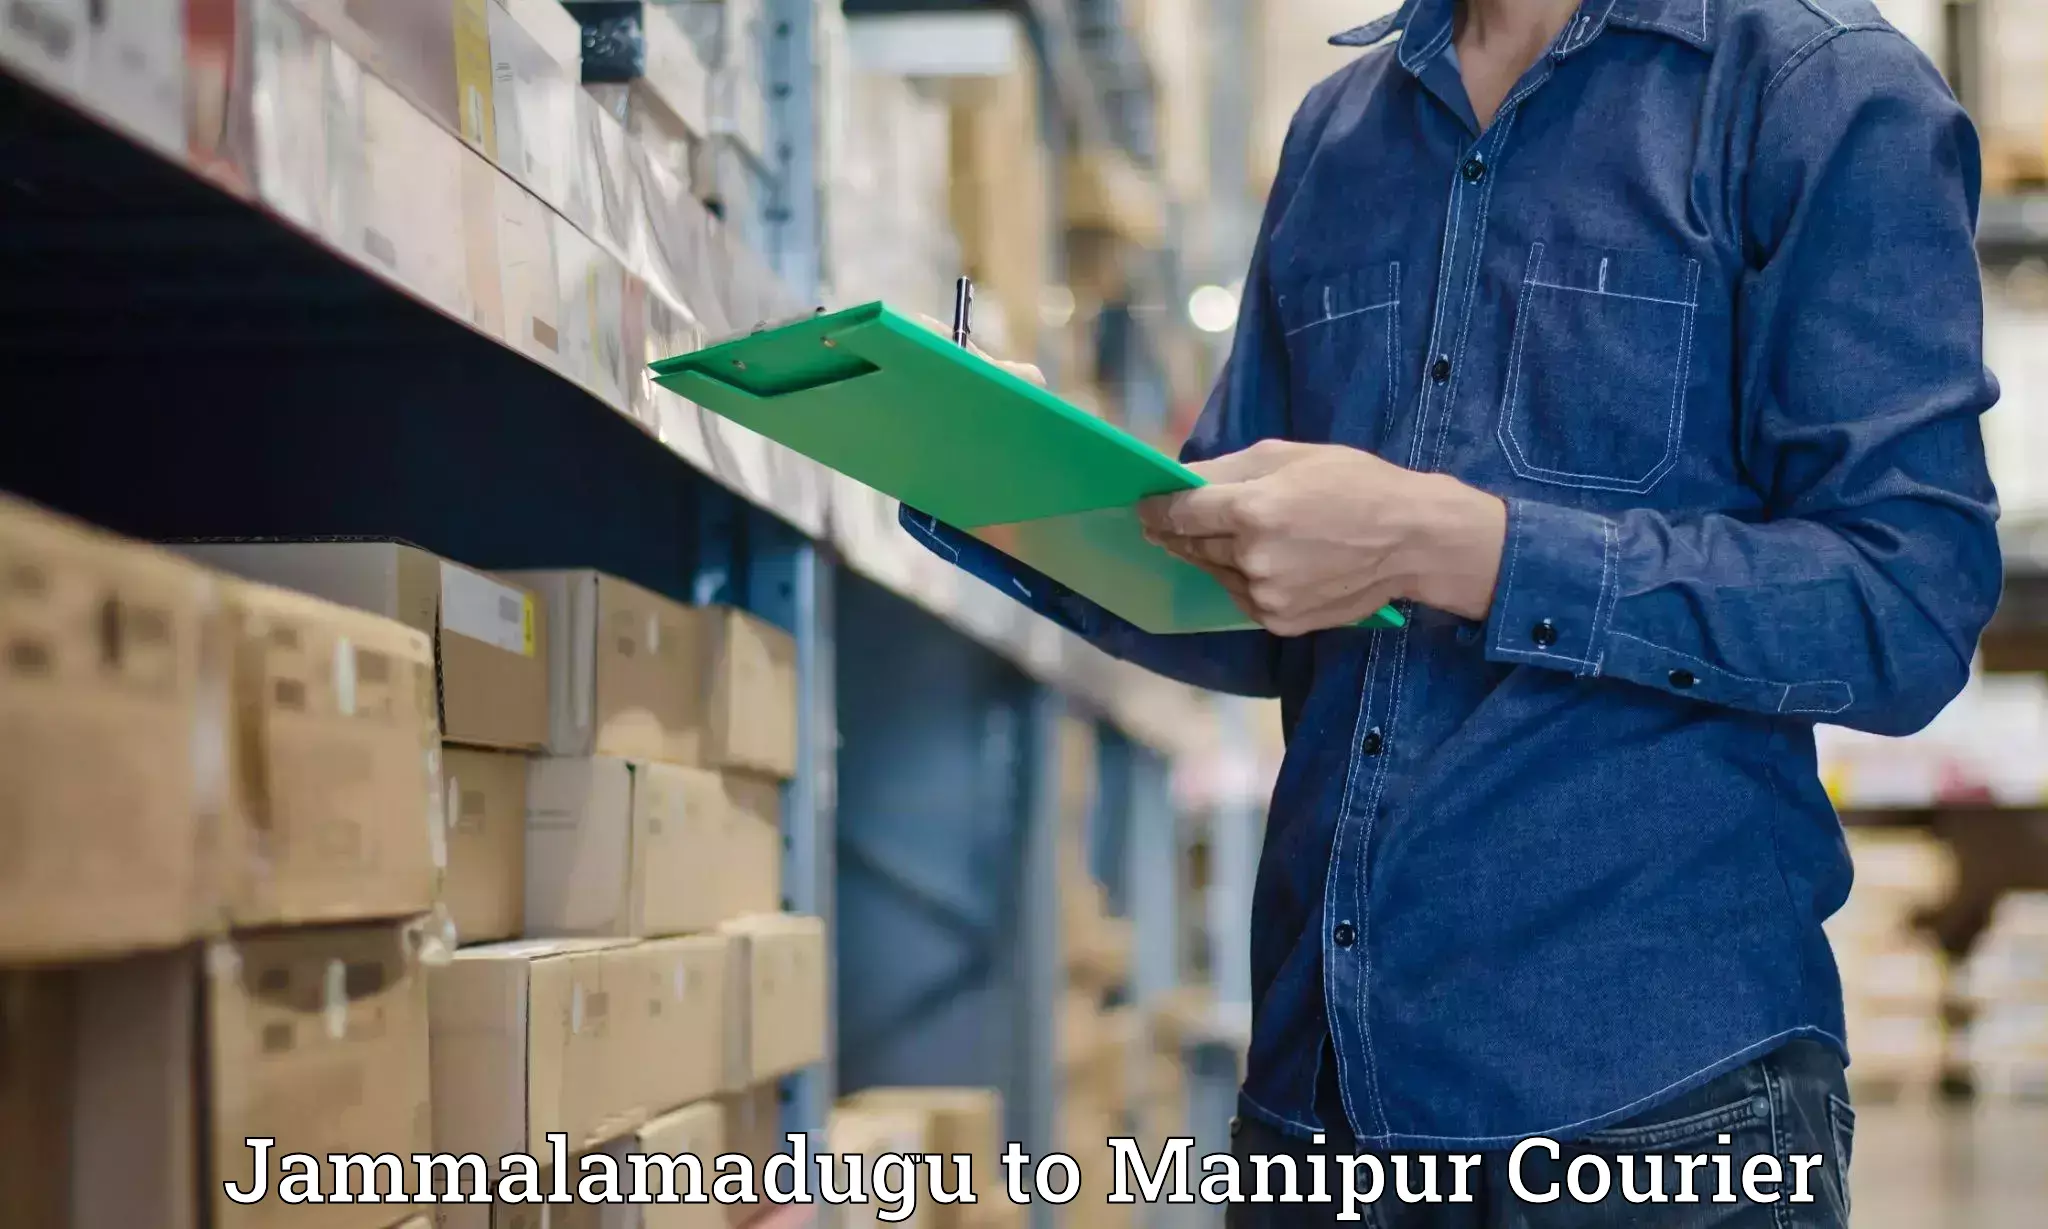 On-call courier service Jammalamadugu to Chandel